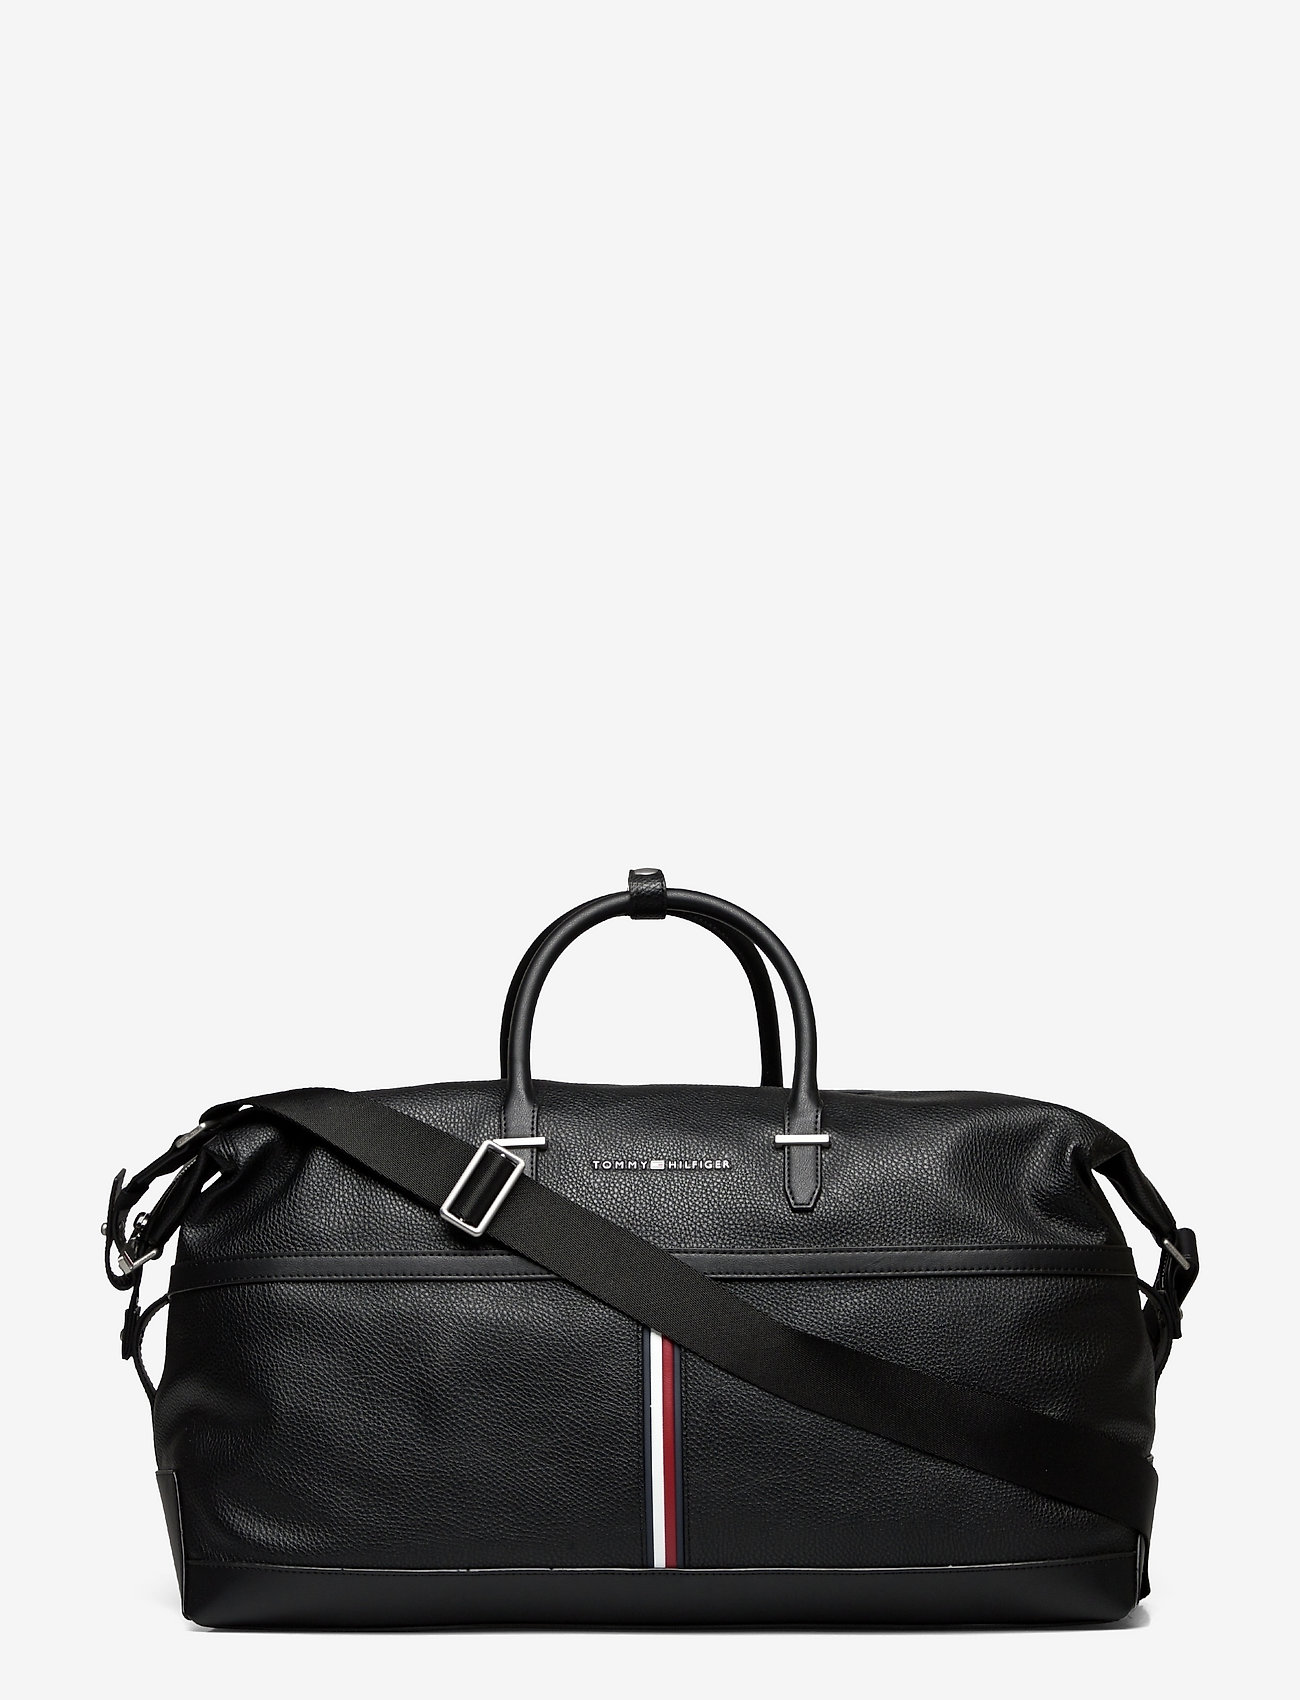 TH Downtown Duffle